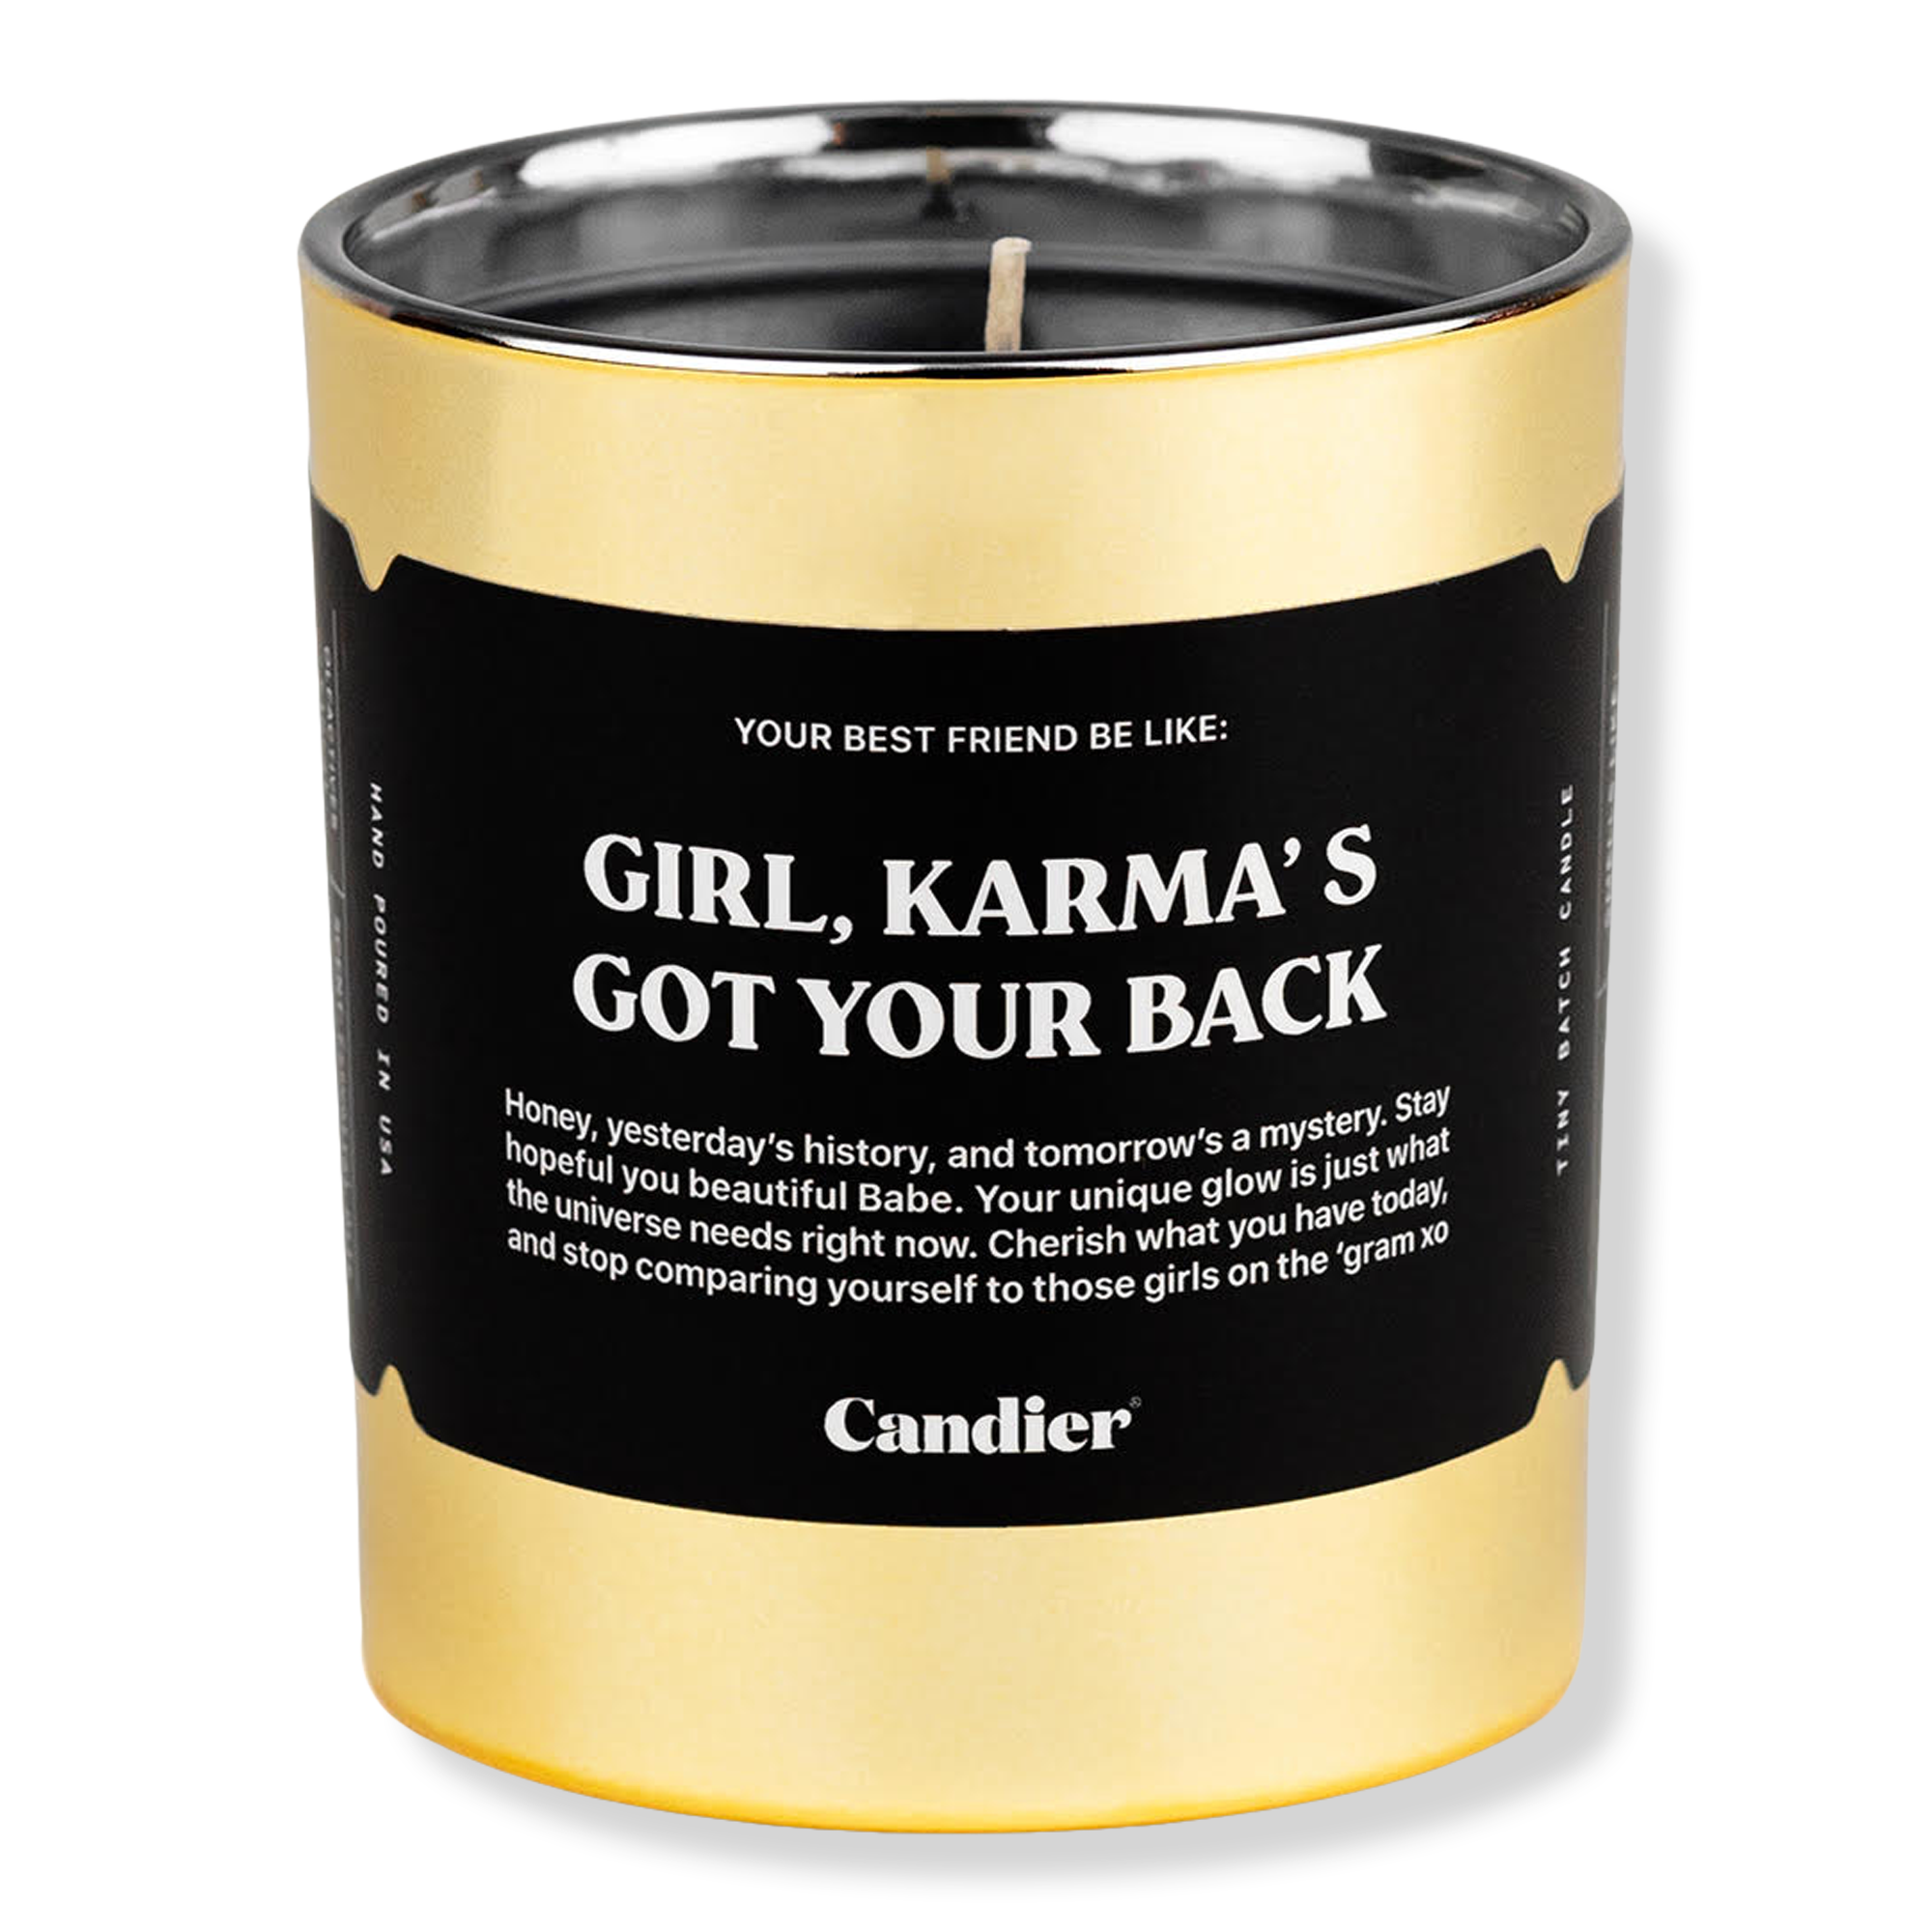 Girl Karma's Got Your Back Candle Candier Ulta Beauty